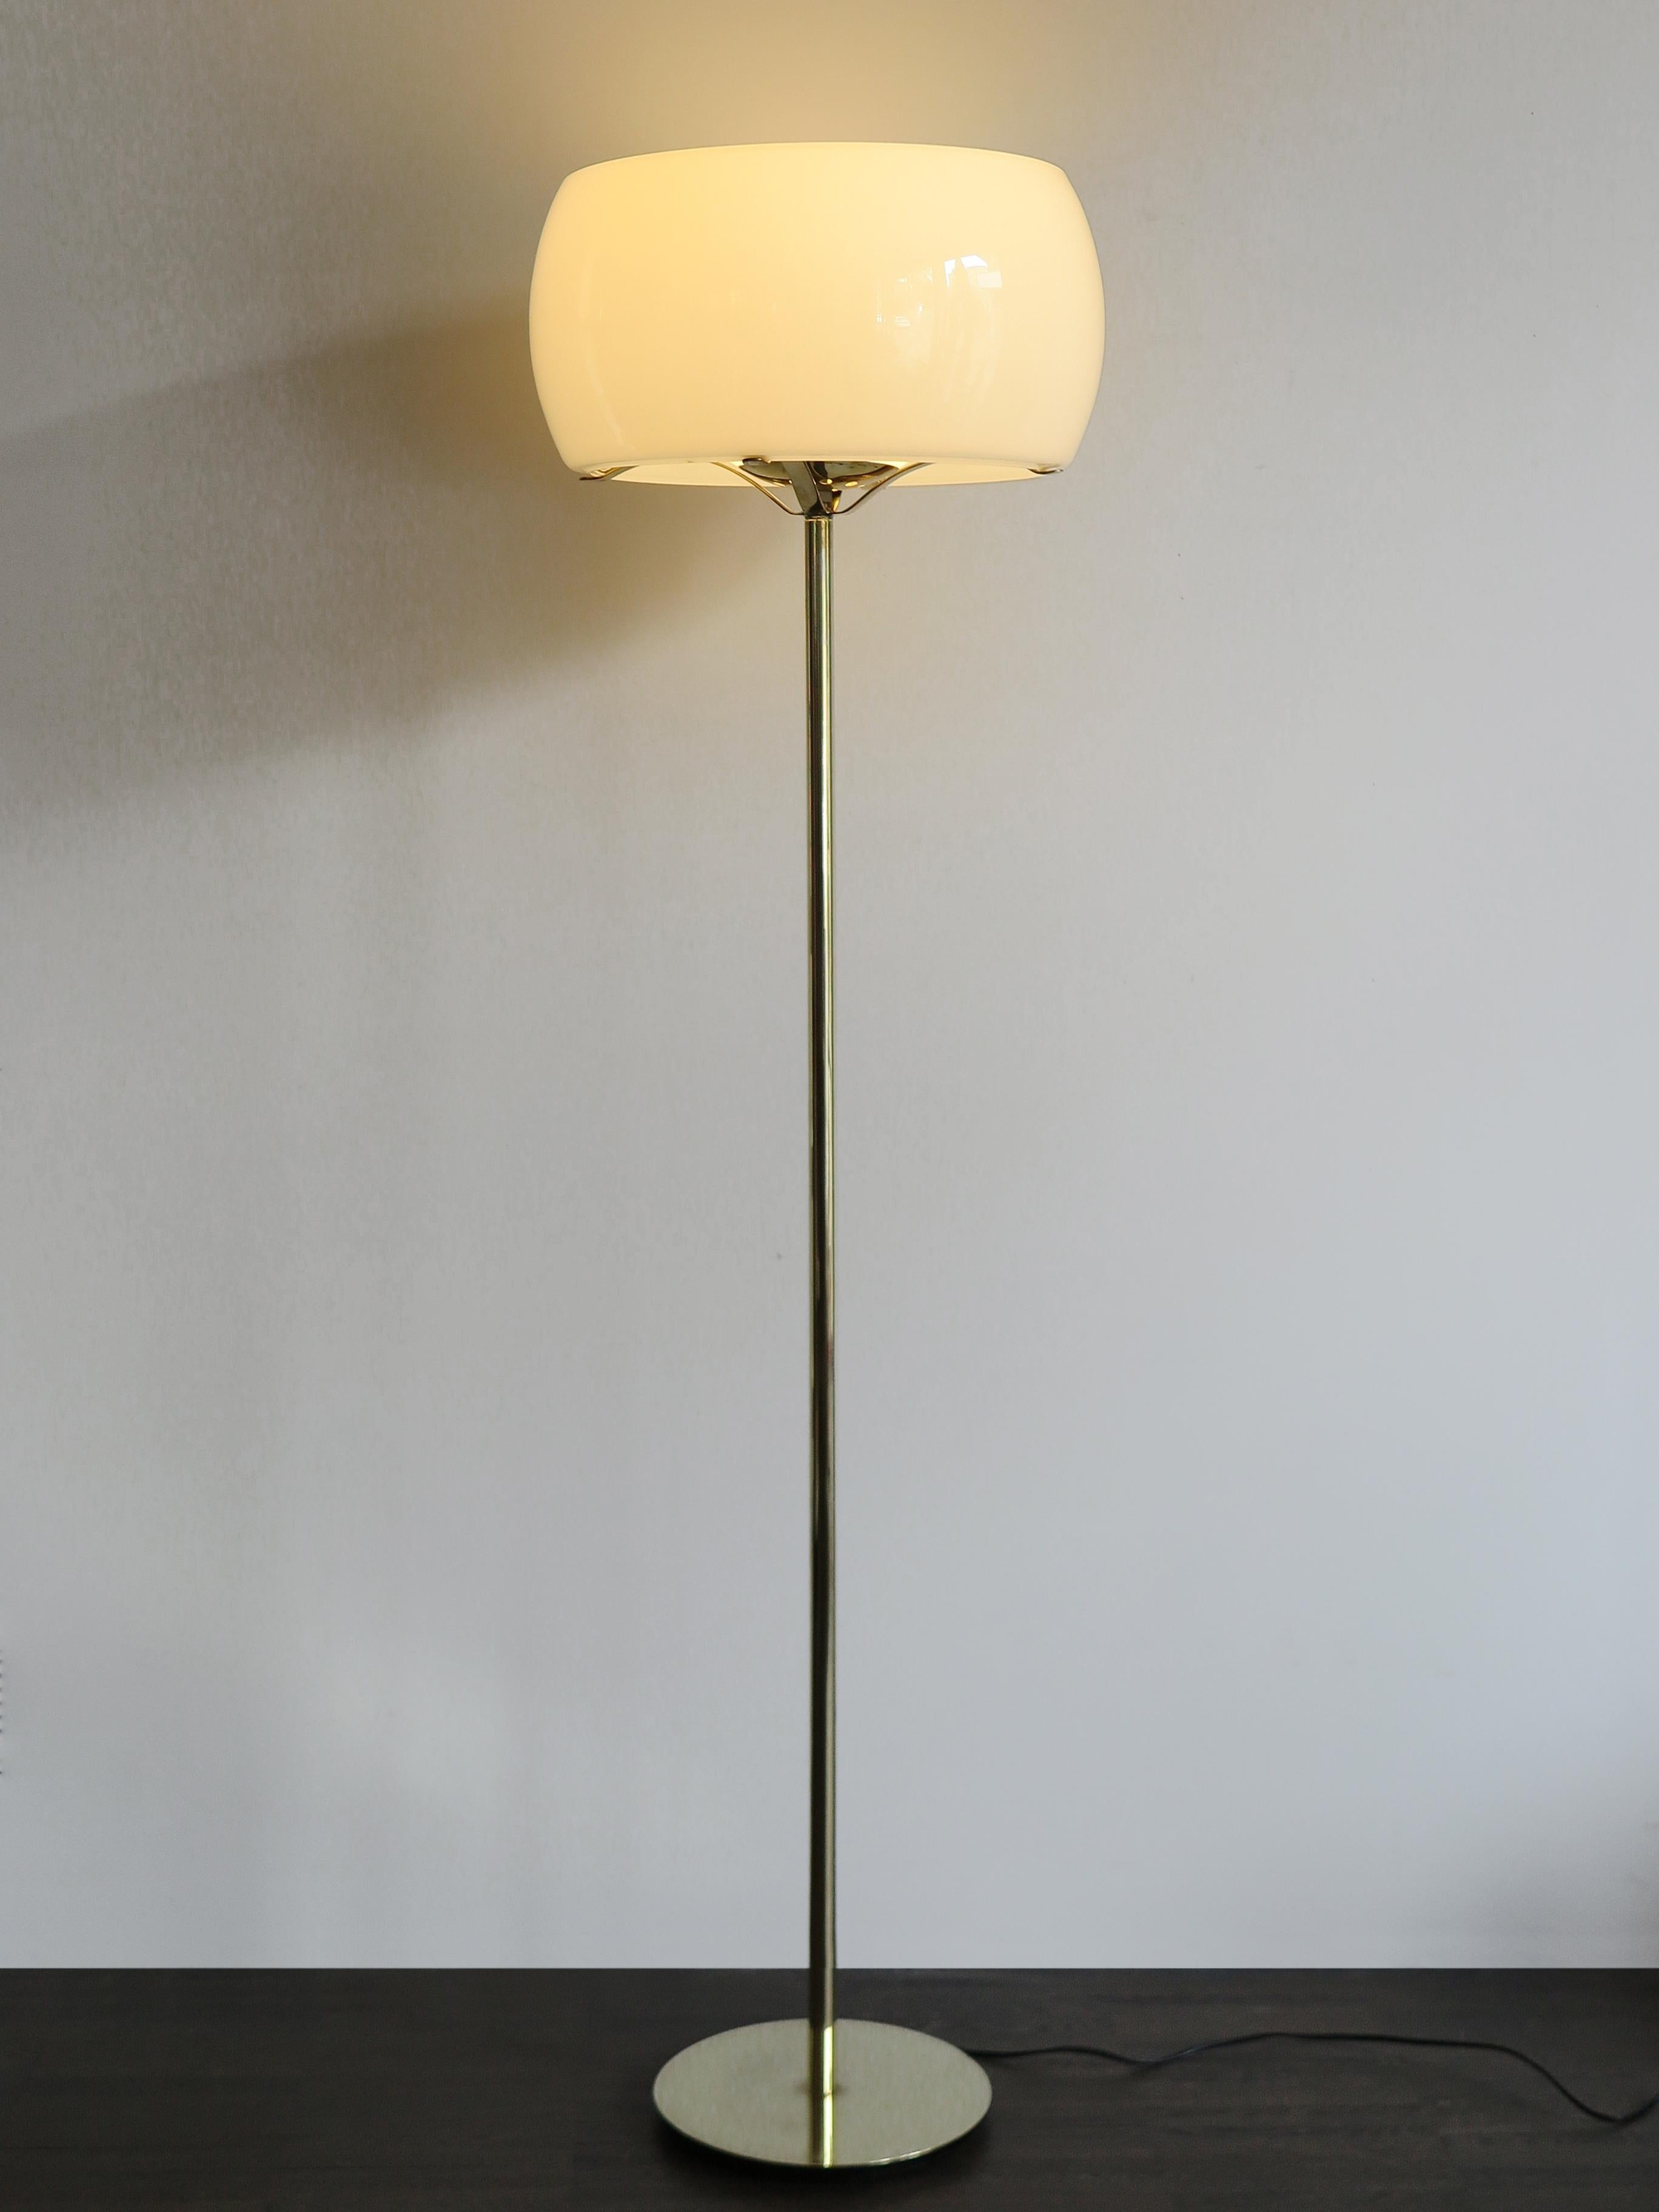 Italian midcentury modern design floor lamp model “Clitunno” large version, designed by Vico Magistretti for Artemide in 1964,
stem and structure in brass and diffuser in white opaline glass, 1960s
Bibliography:
G. Gramigna, 1950/2000 Italian